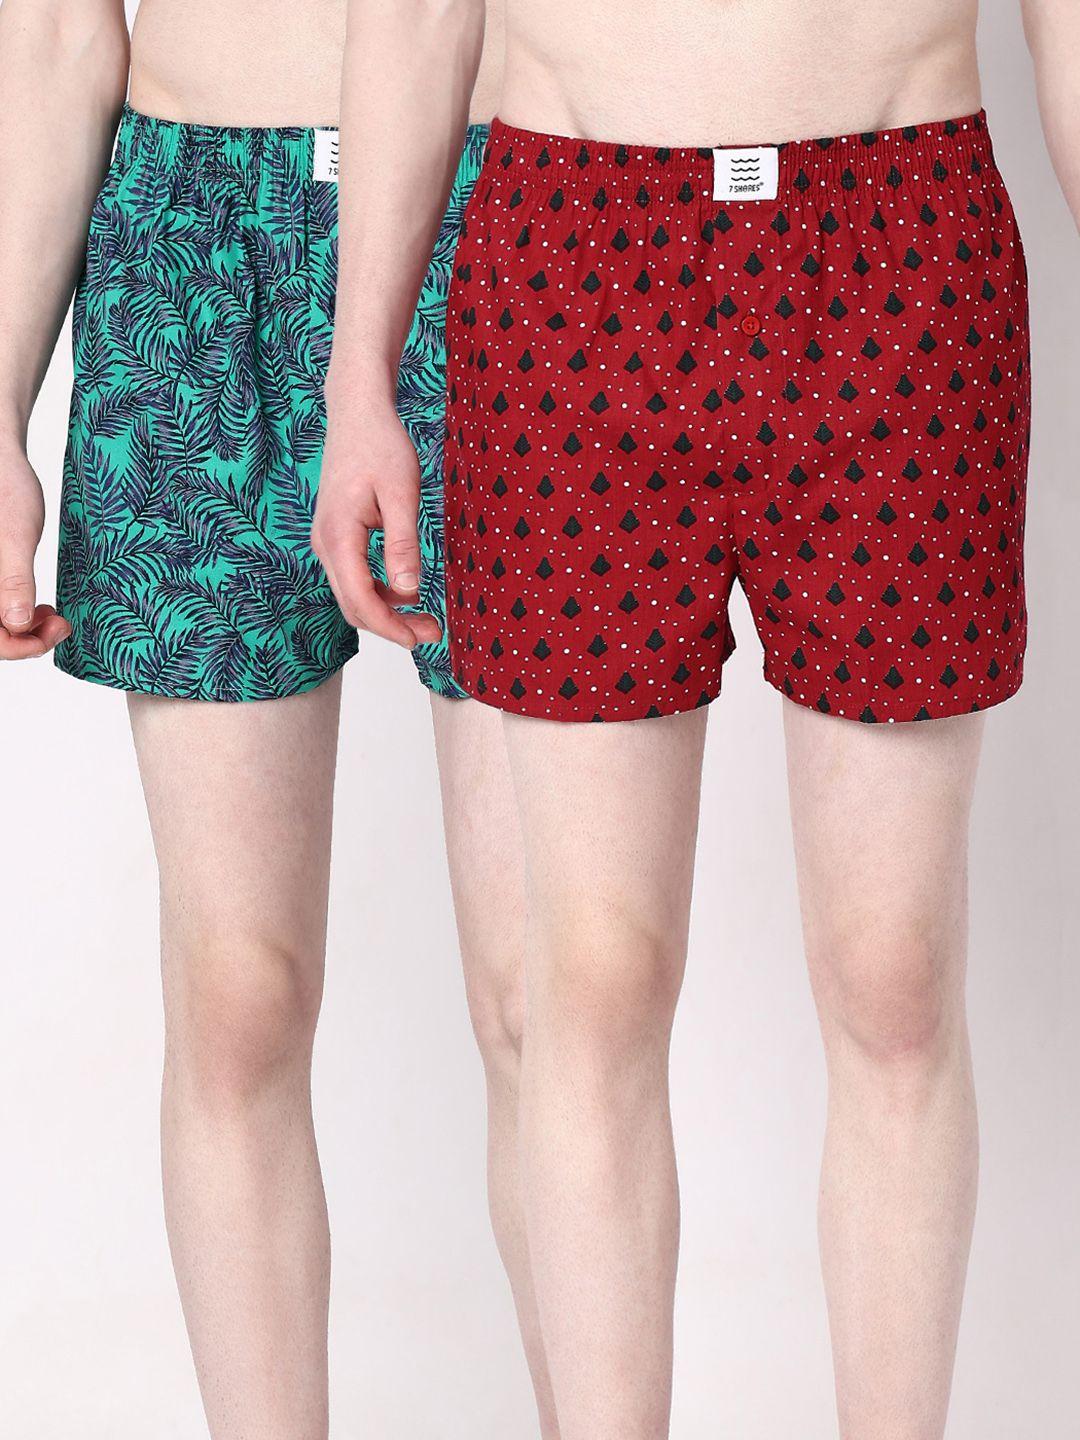 7shores pack of 2 printed cotton boxers bst-001